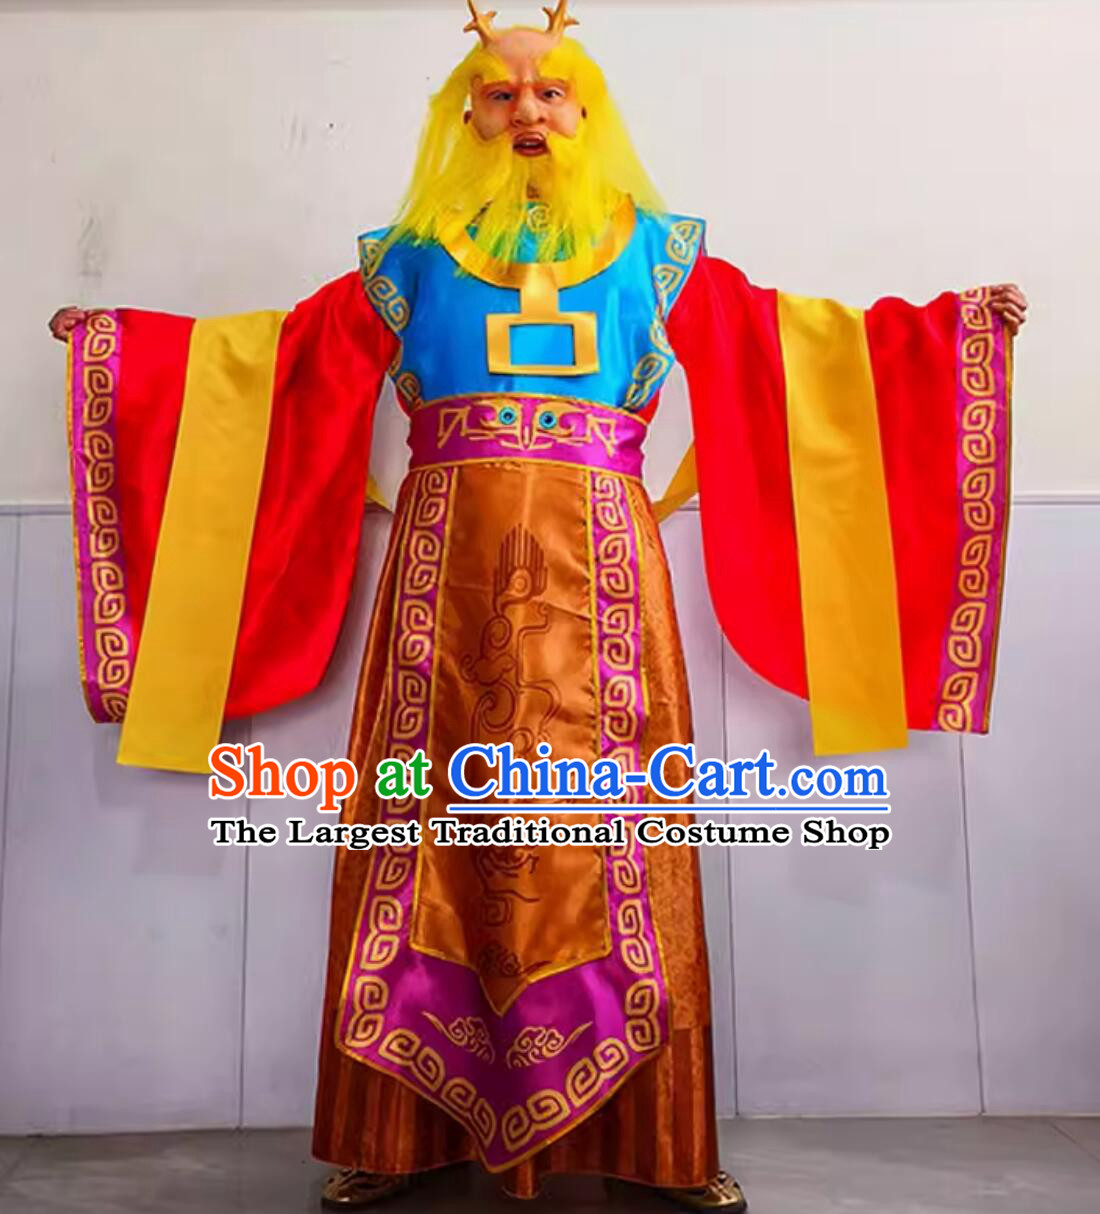 China Drama Journey to the West Dragon King of the South Sea Ao Qin Costumes Halloween Cosplay Clothing